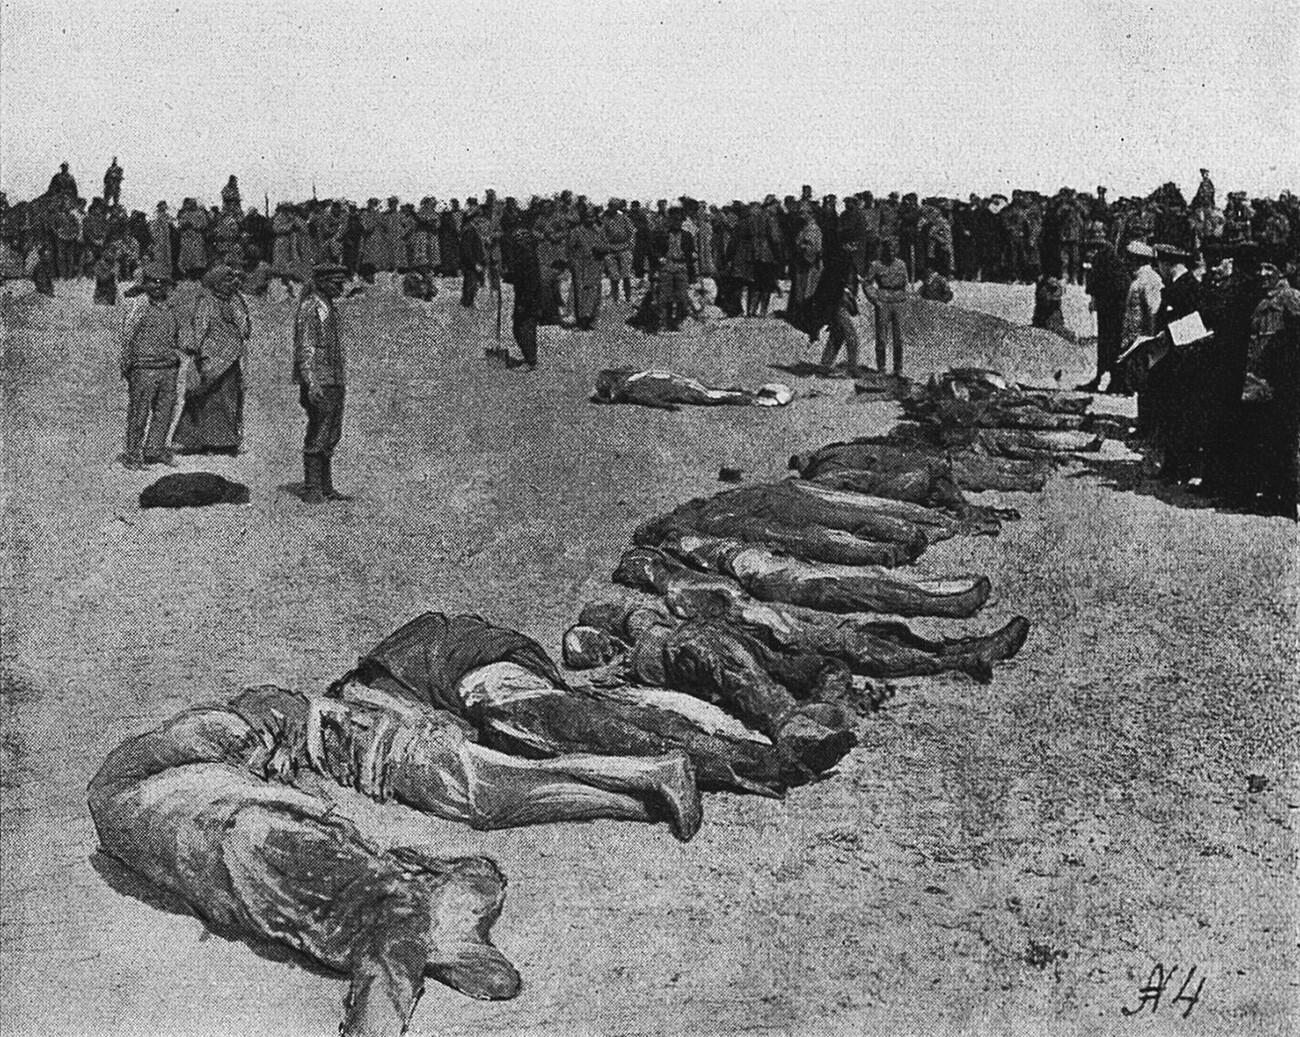 Corpses of victims of the winter 1918 Red terror in Yevpatoria, Crimea.